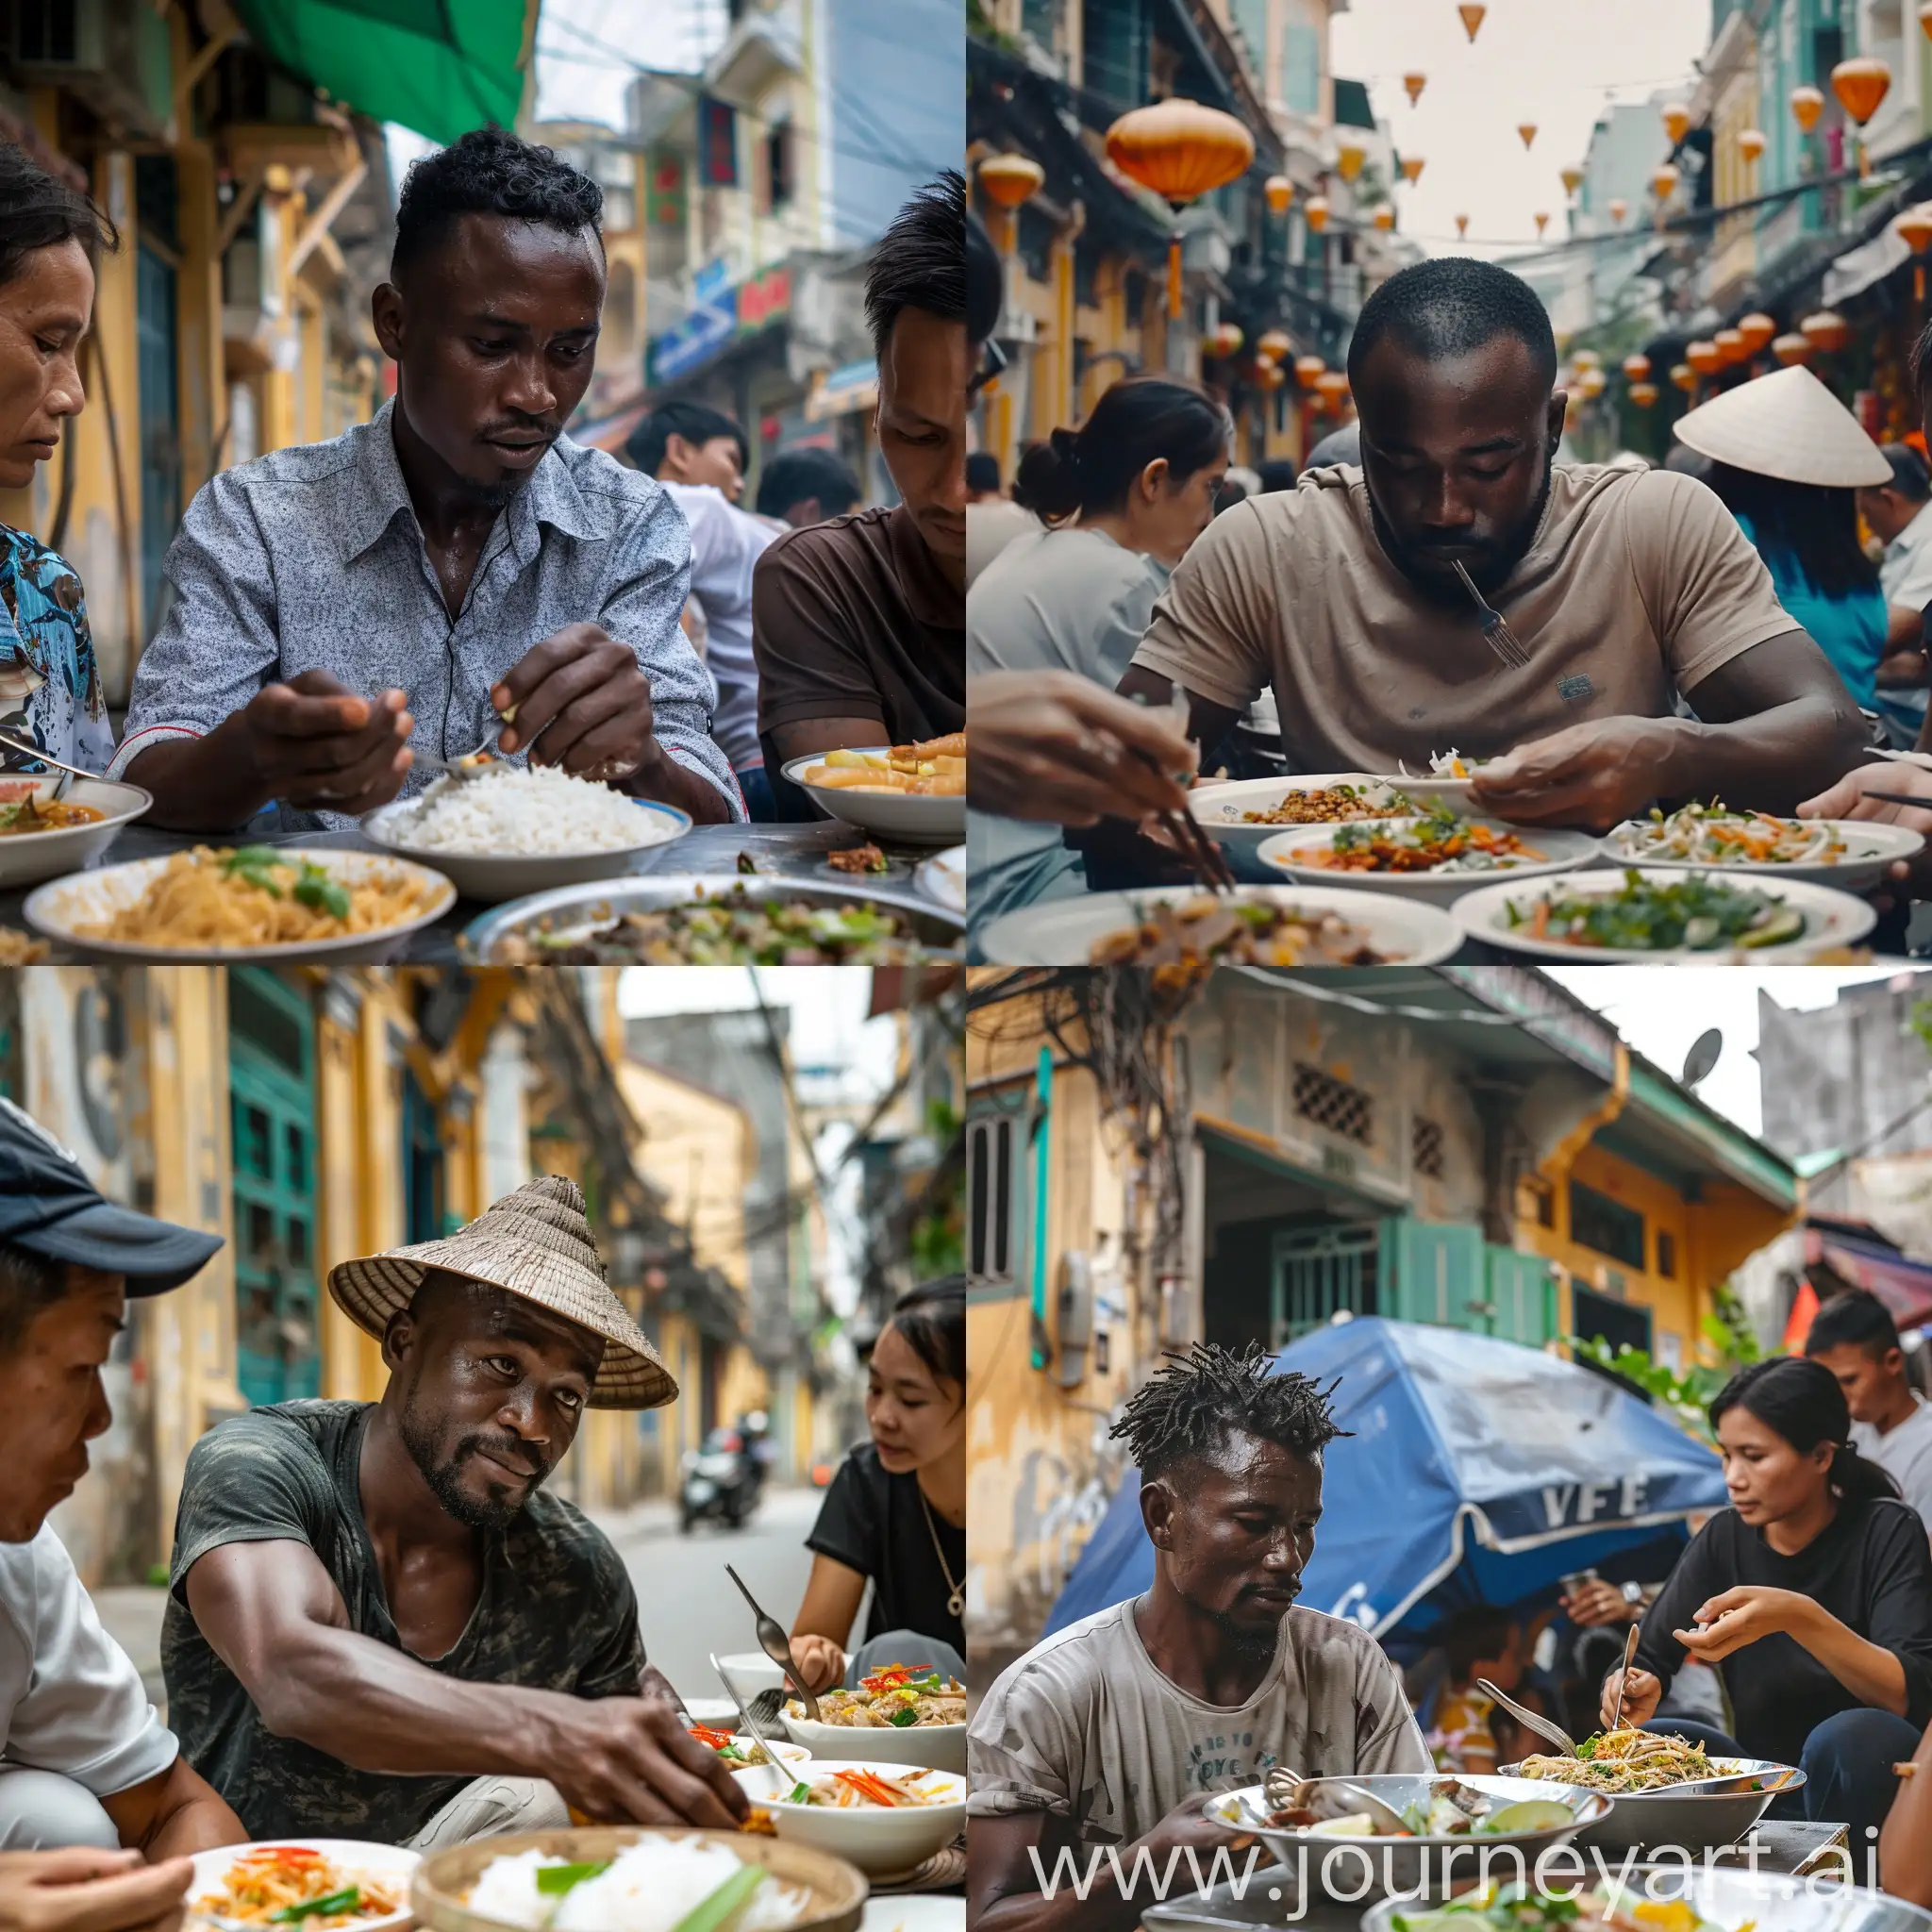 Create a scene in vietnam, 1 black man in the city, with locals. eating food